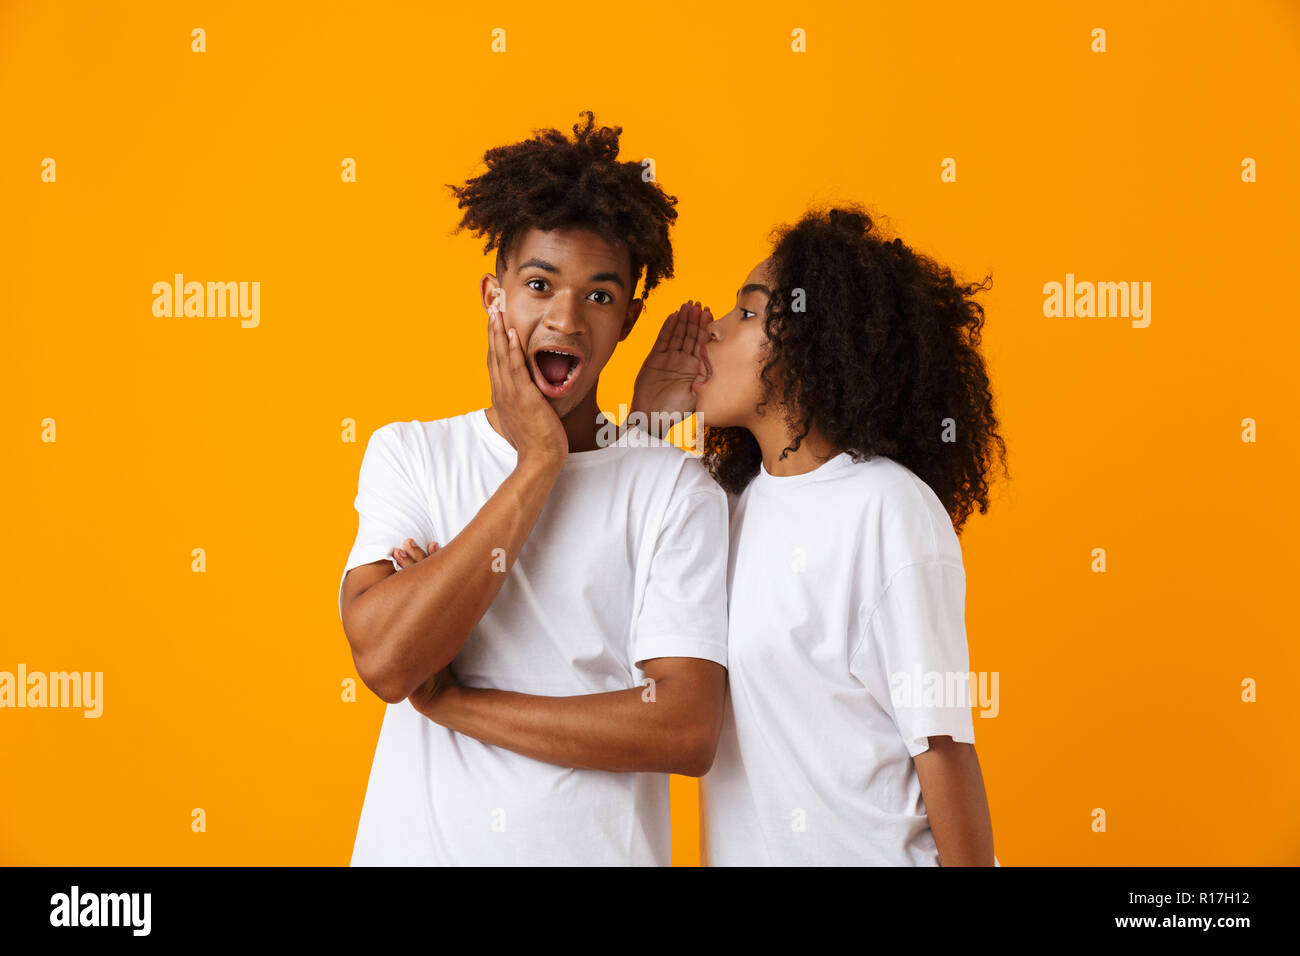 Image Of Emotional Young Cute African Couple Posing Isolated Over